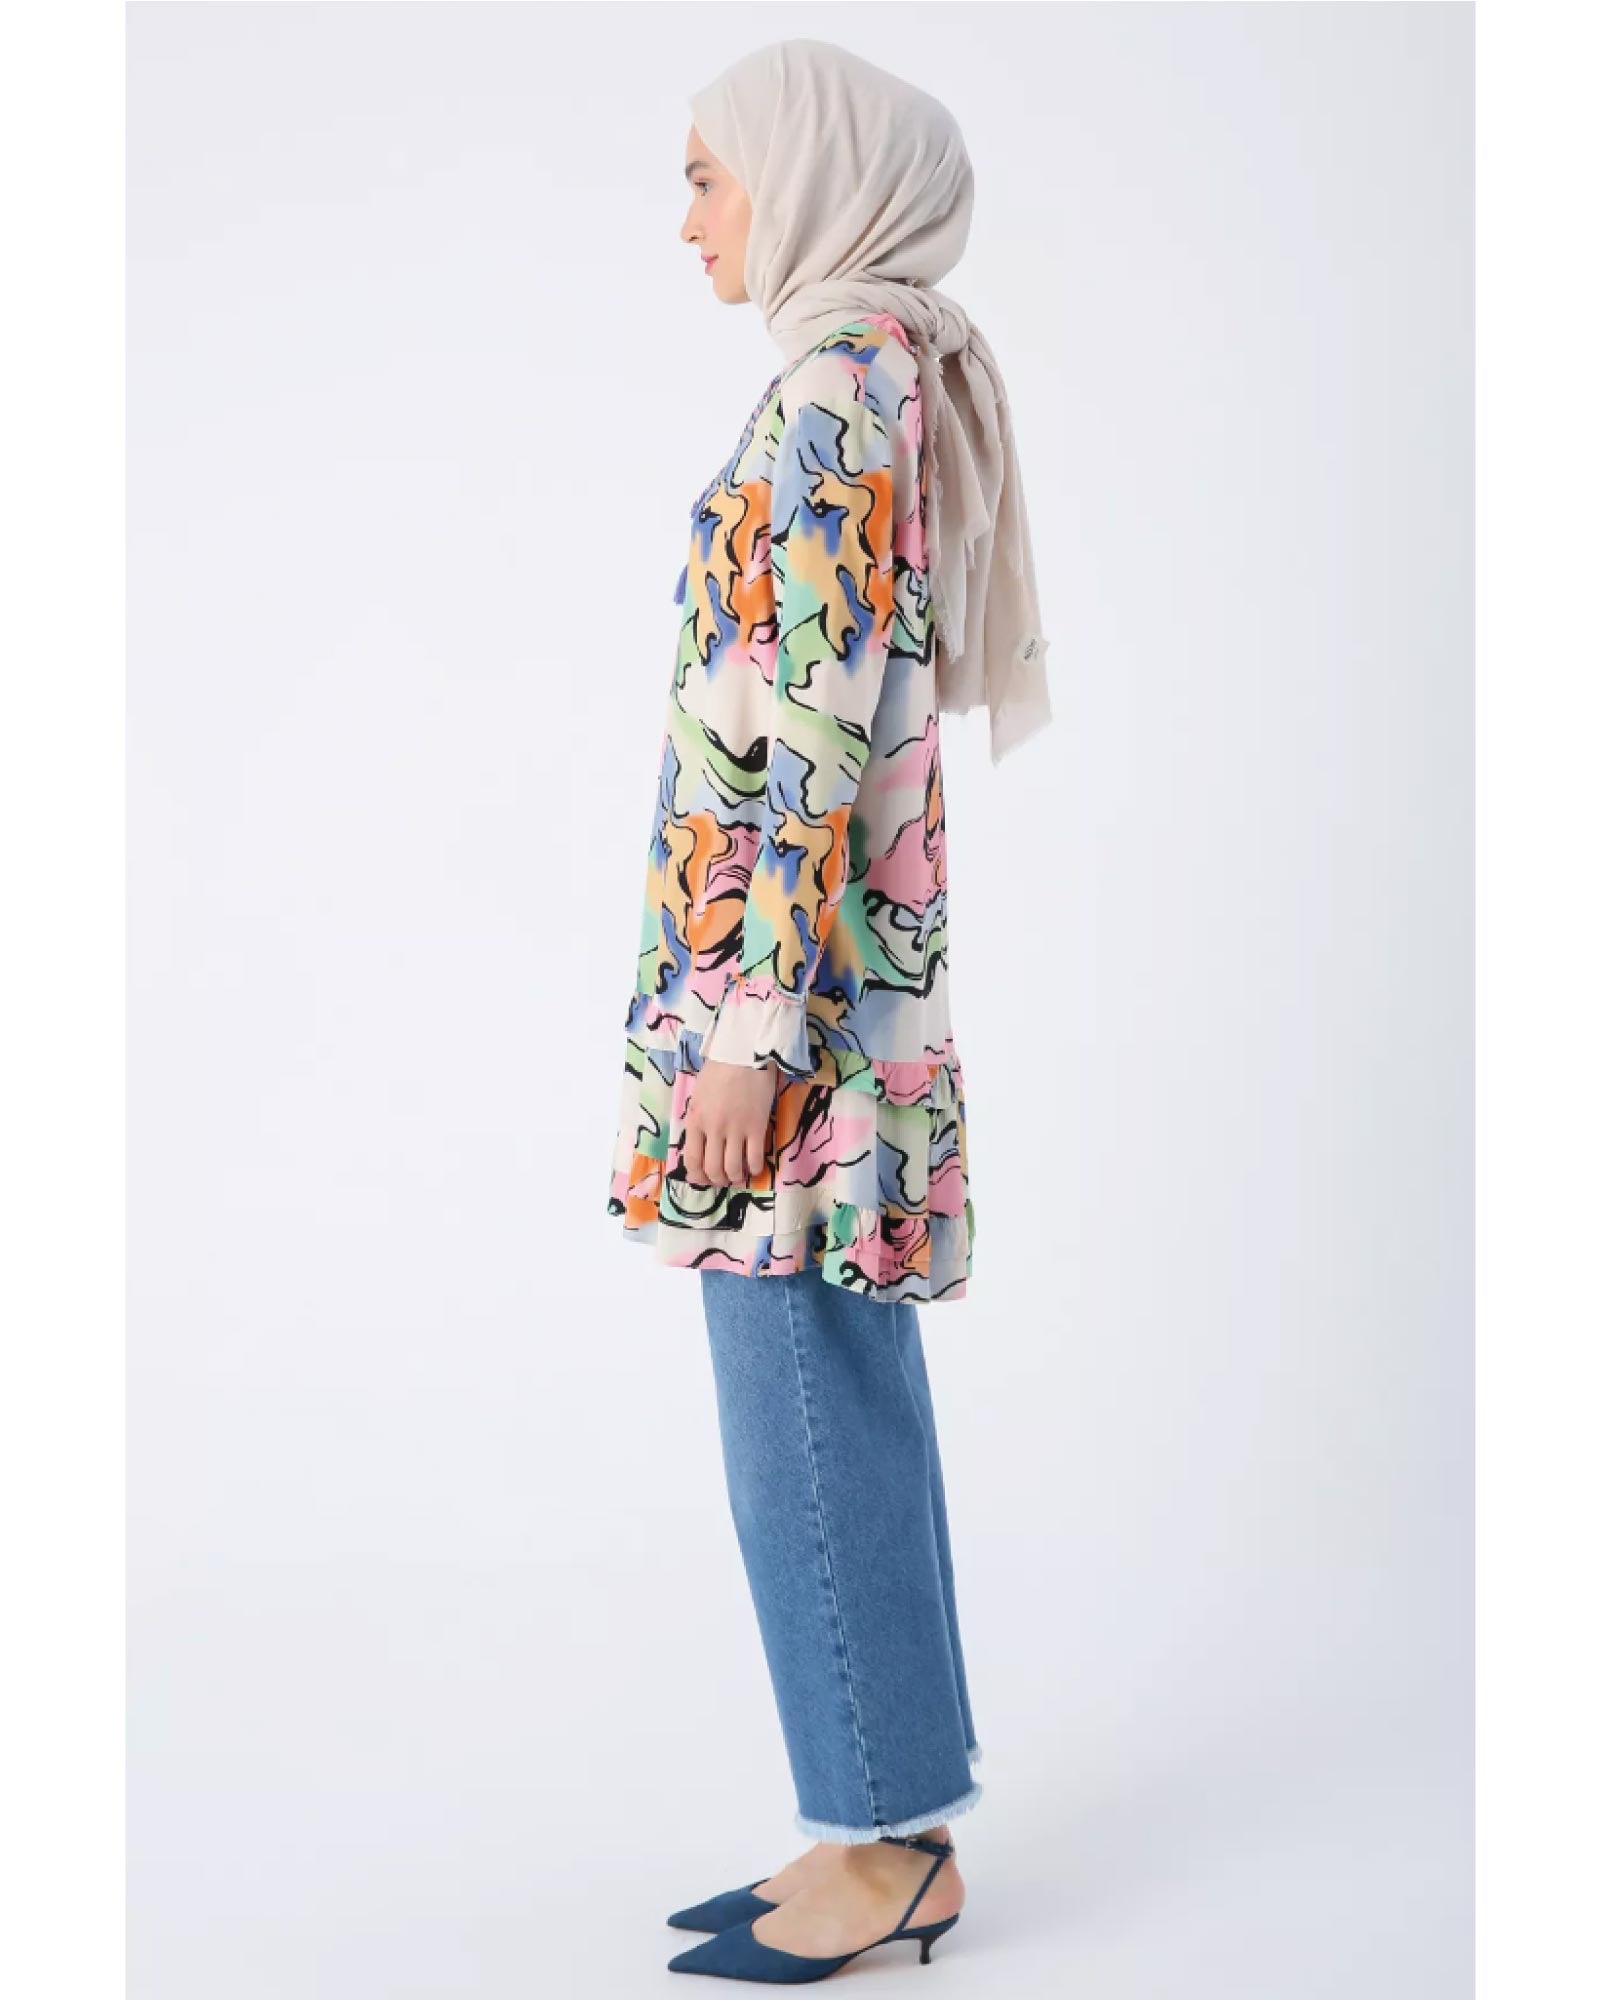 Viscose hijab tunic with pleated details at the neckline, sleeves and hem, as well as a pattern and zip closure